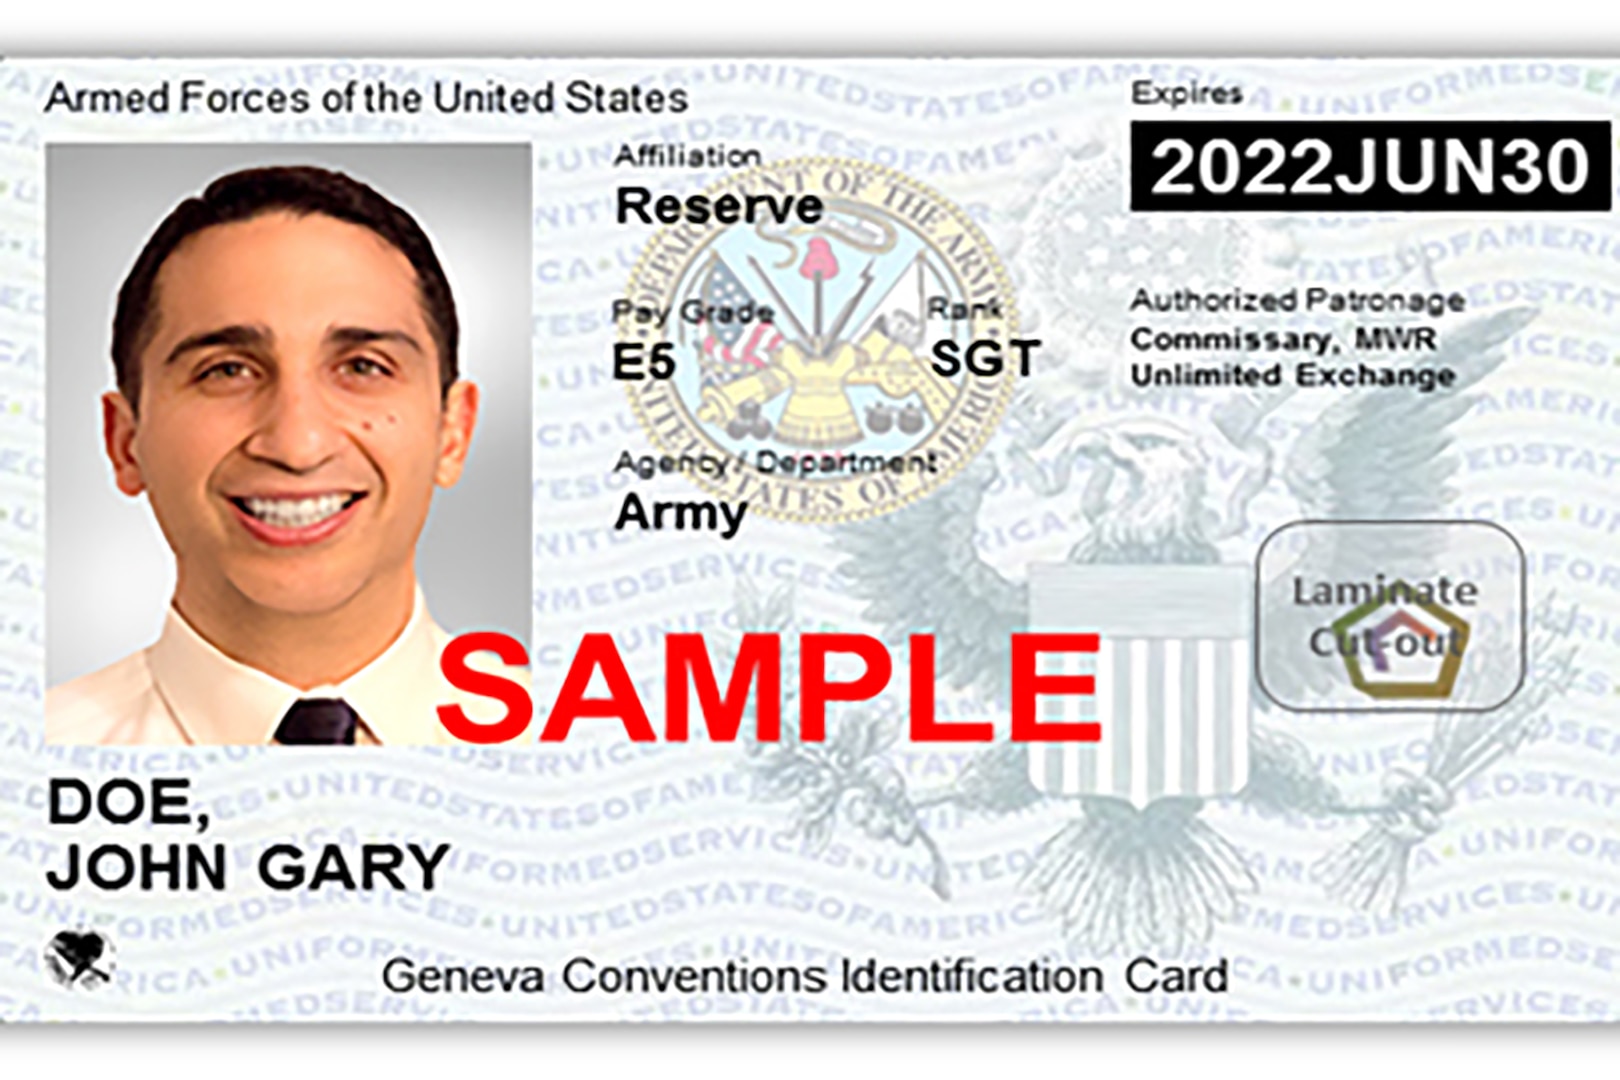 new-id-cards-being-issued-for-military-family-members-retirees-joint